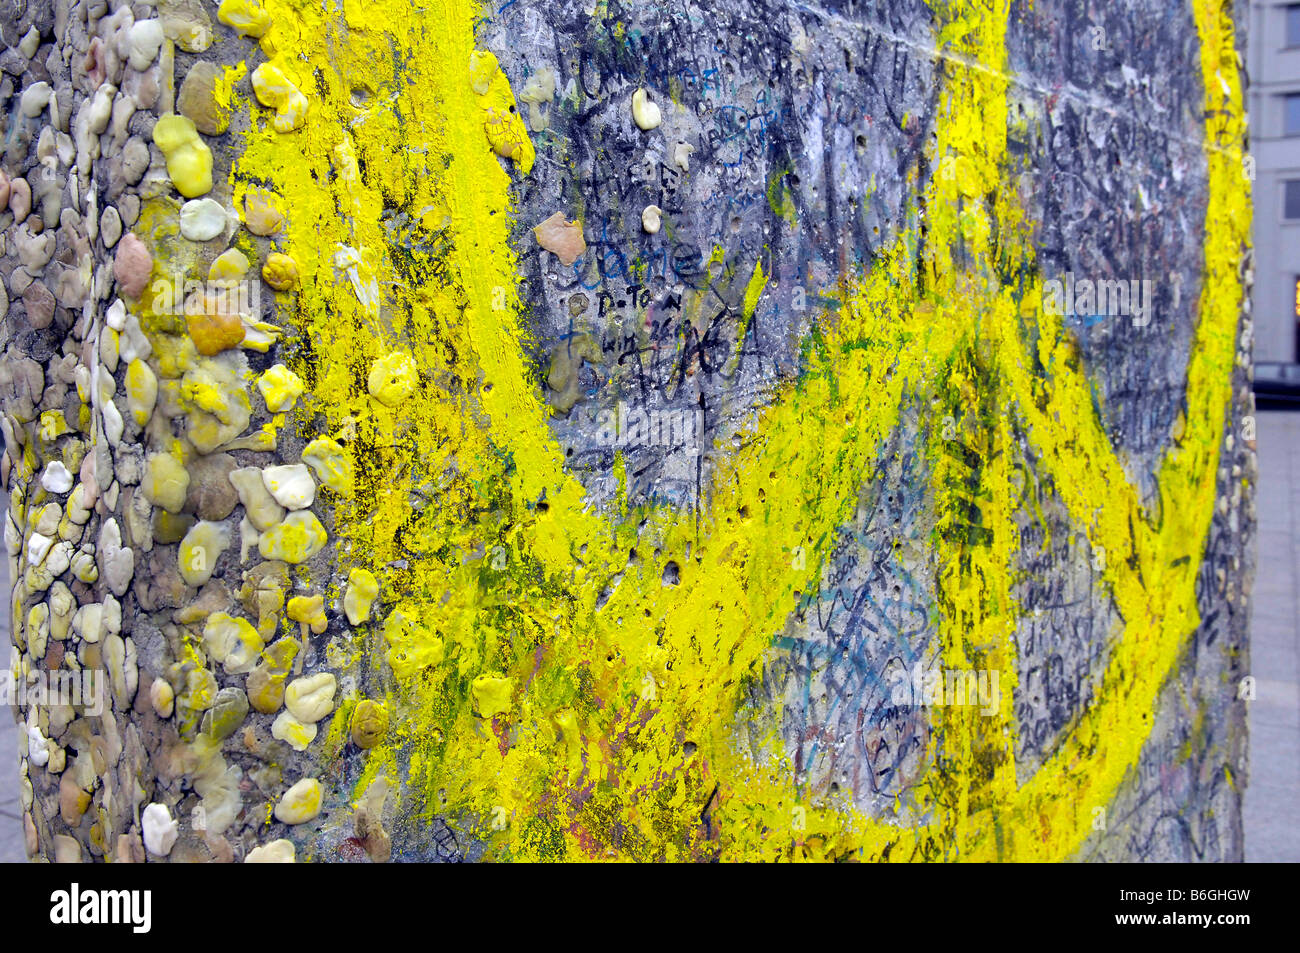 yellow peace sign berlin wall chewing gum Stock Photo